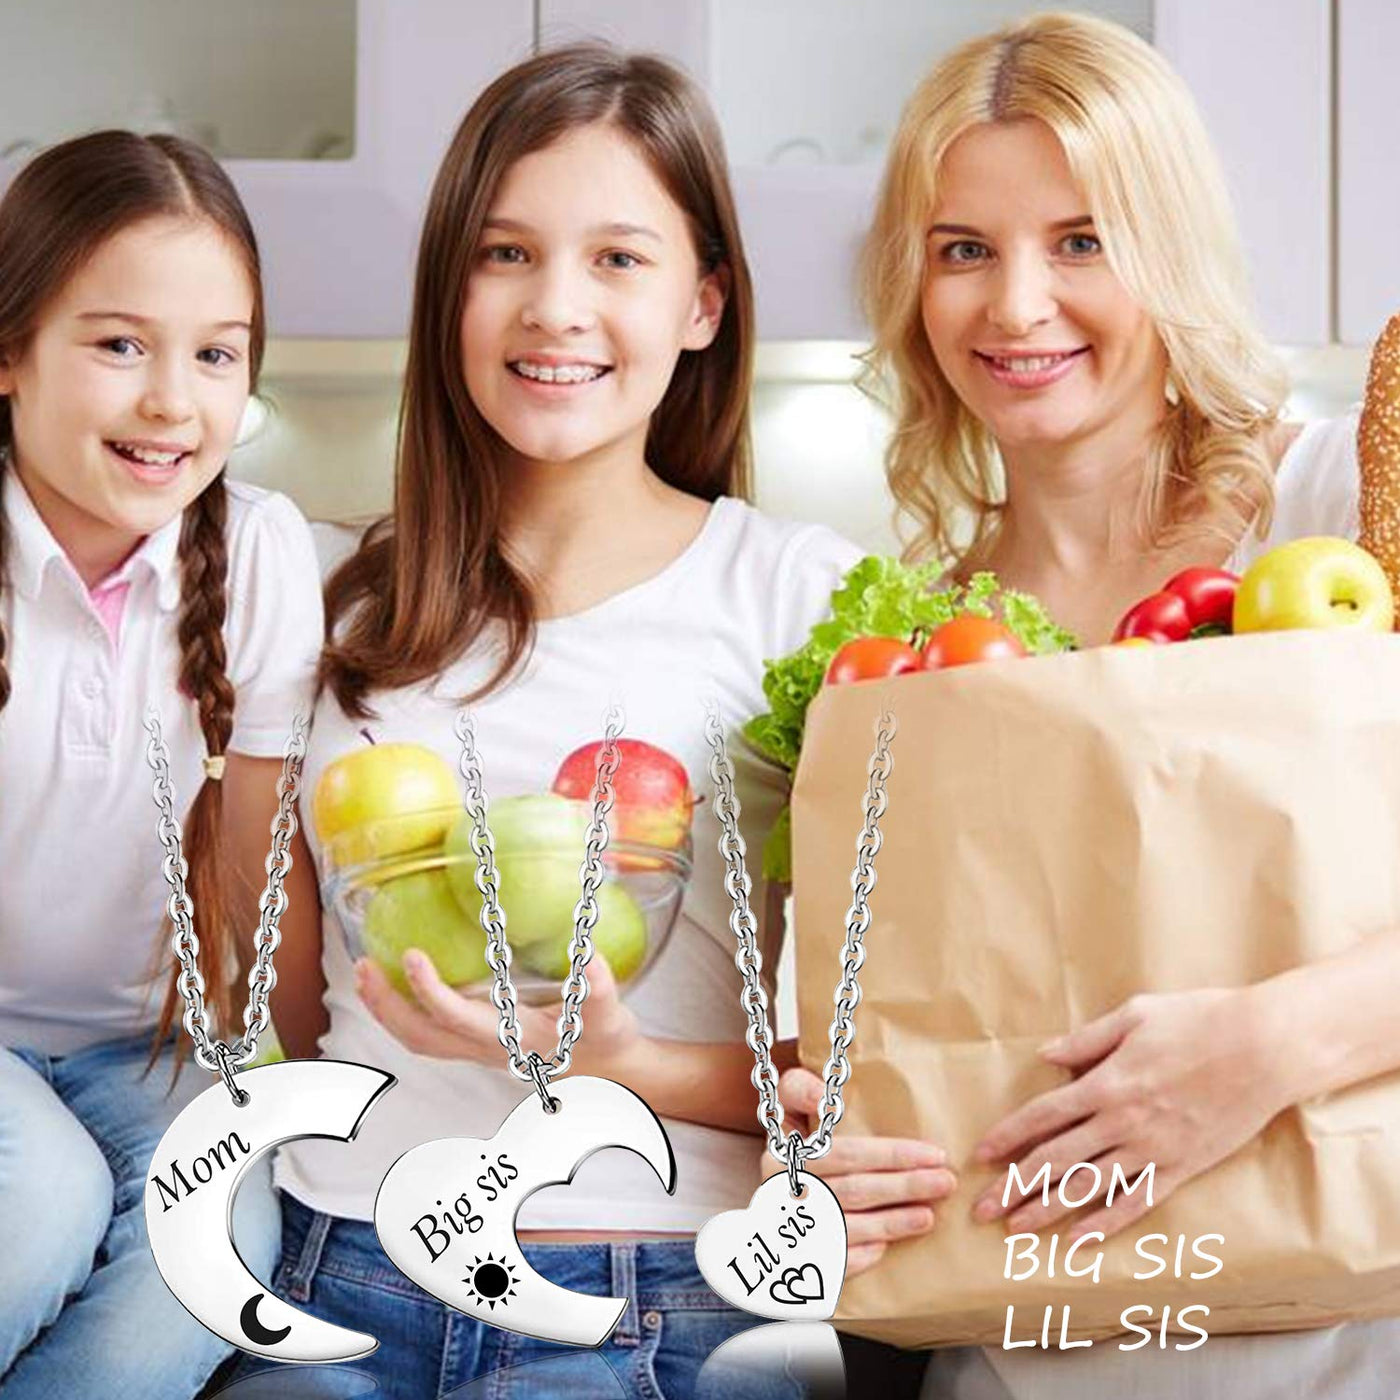 JQFEN 3 Pcs Big Sis Mom Little Sis Heart Necklace Mother Daughter Gifts  Necklace Birthday Christmas Gift : Clothing, Shoes & Jewelry - Amazon.com